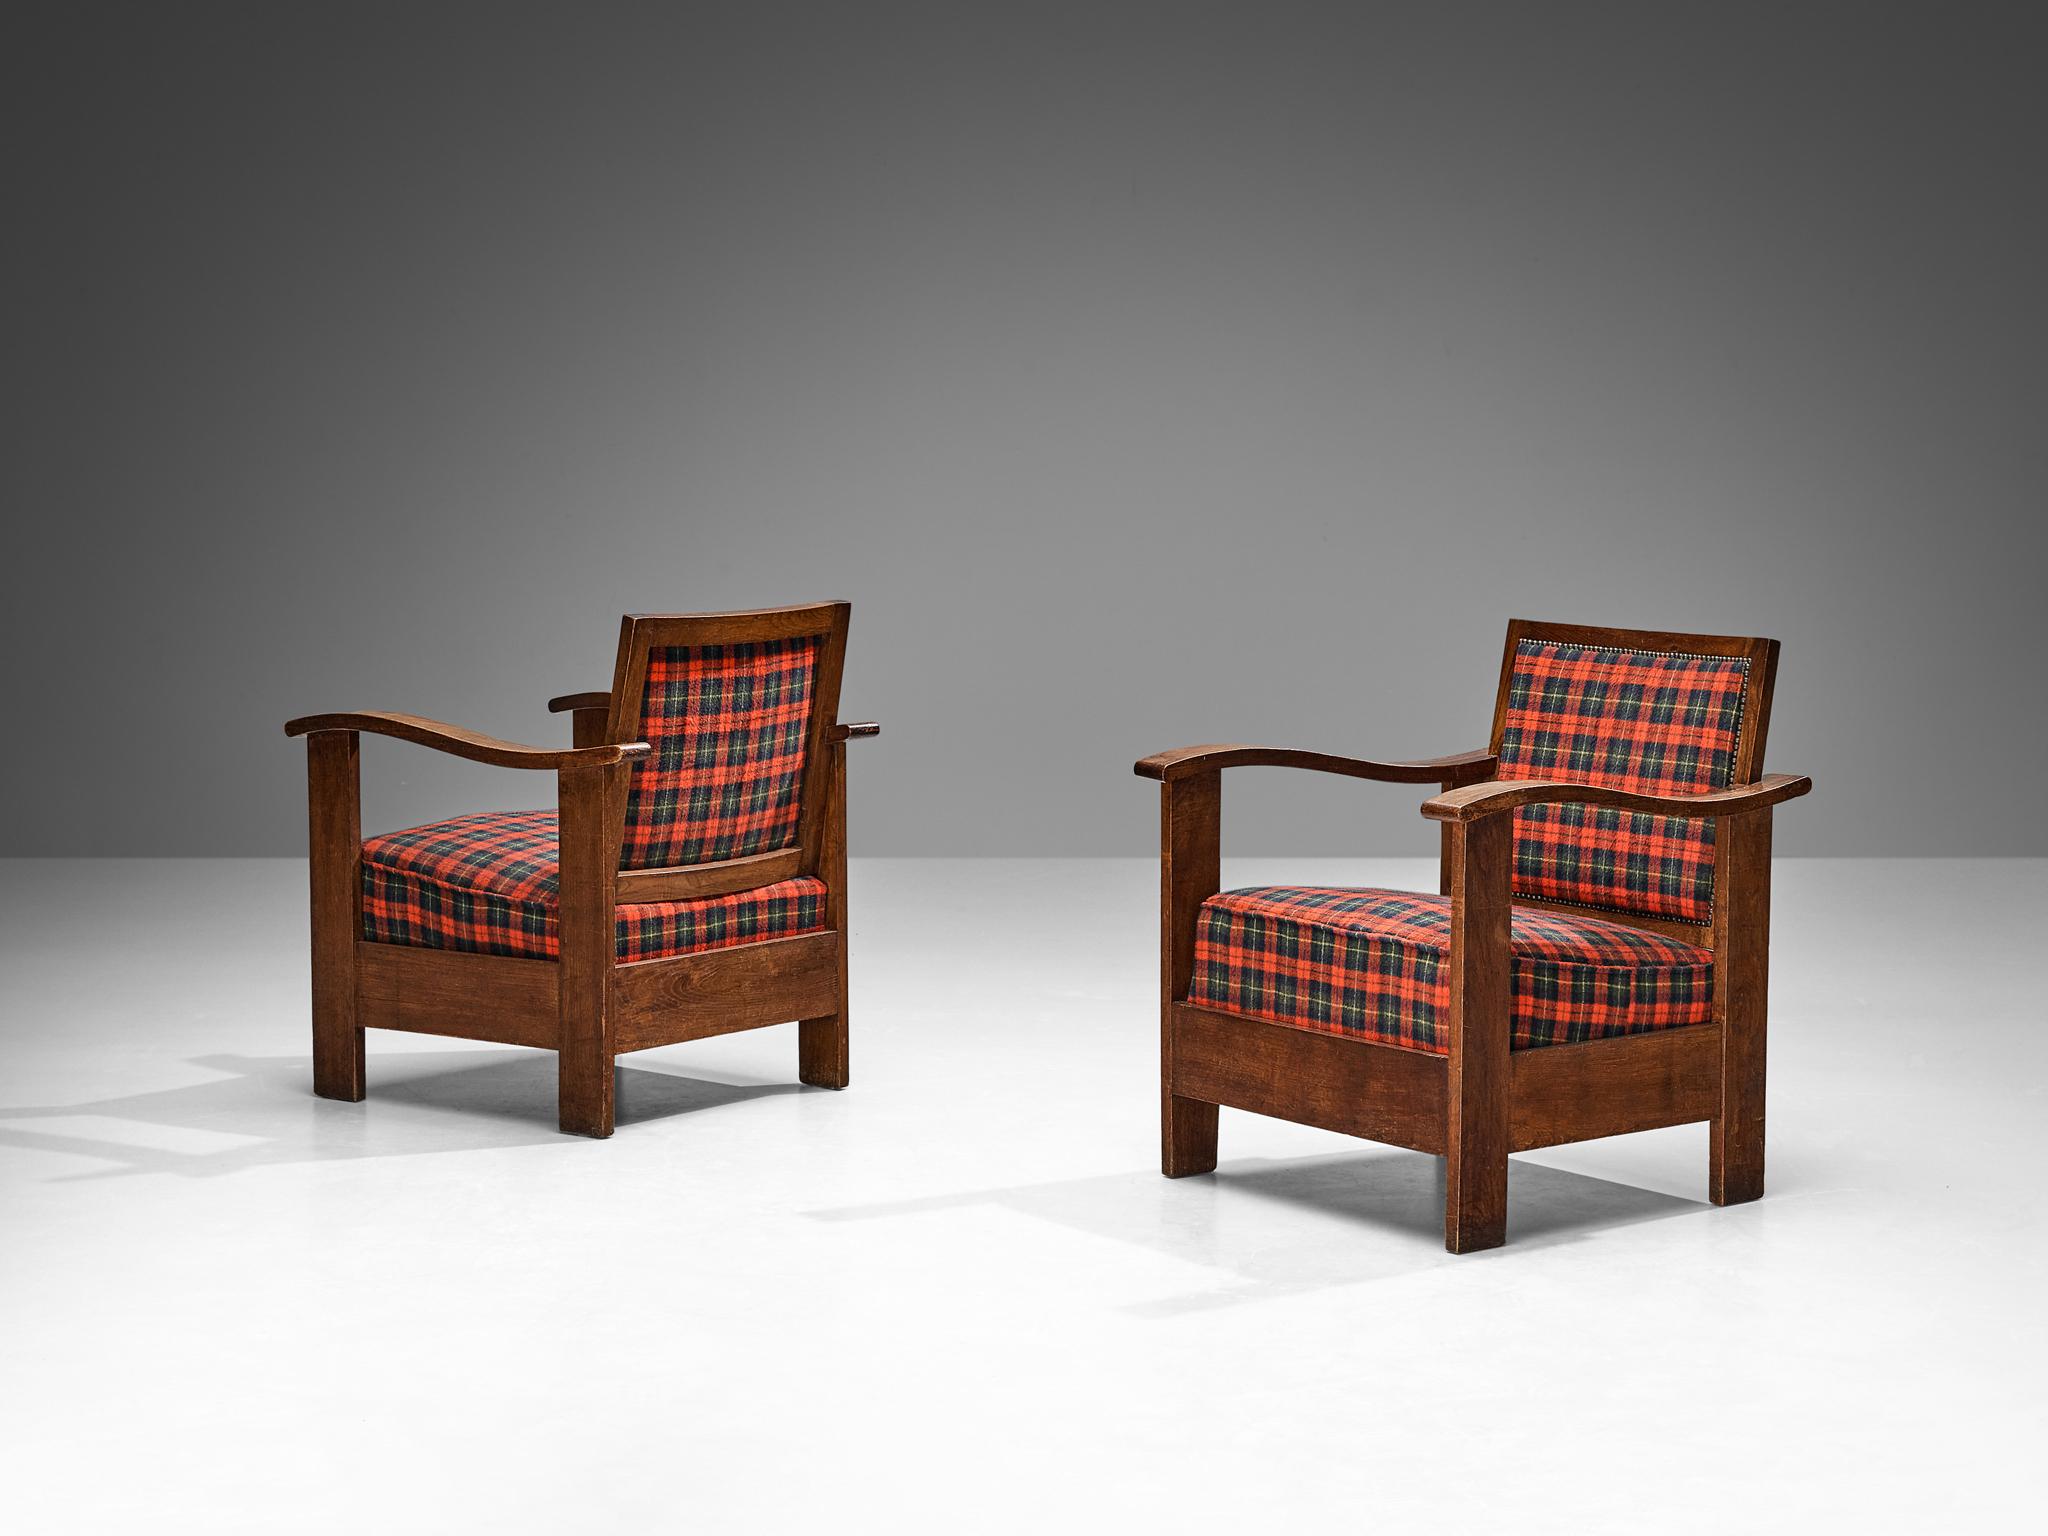 Josep Palau Oller, pair of armchairs, wool, oak, metal, Spain, Barcelona, Circa. 1930

Beautifully constructed pair of lounge chairs of Spanish origin designed by Josep Palau Oller (1888-1961). The design conceals an evolved rustic character with